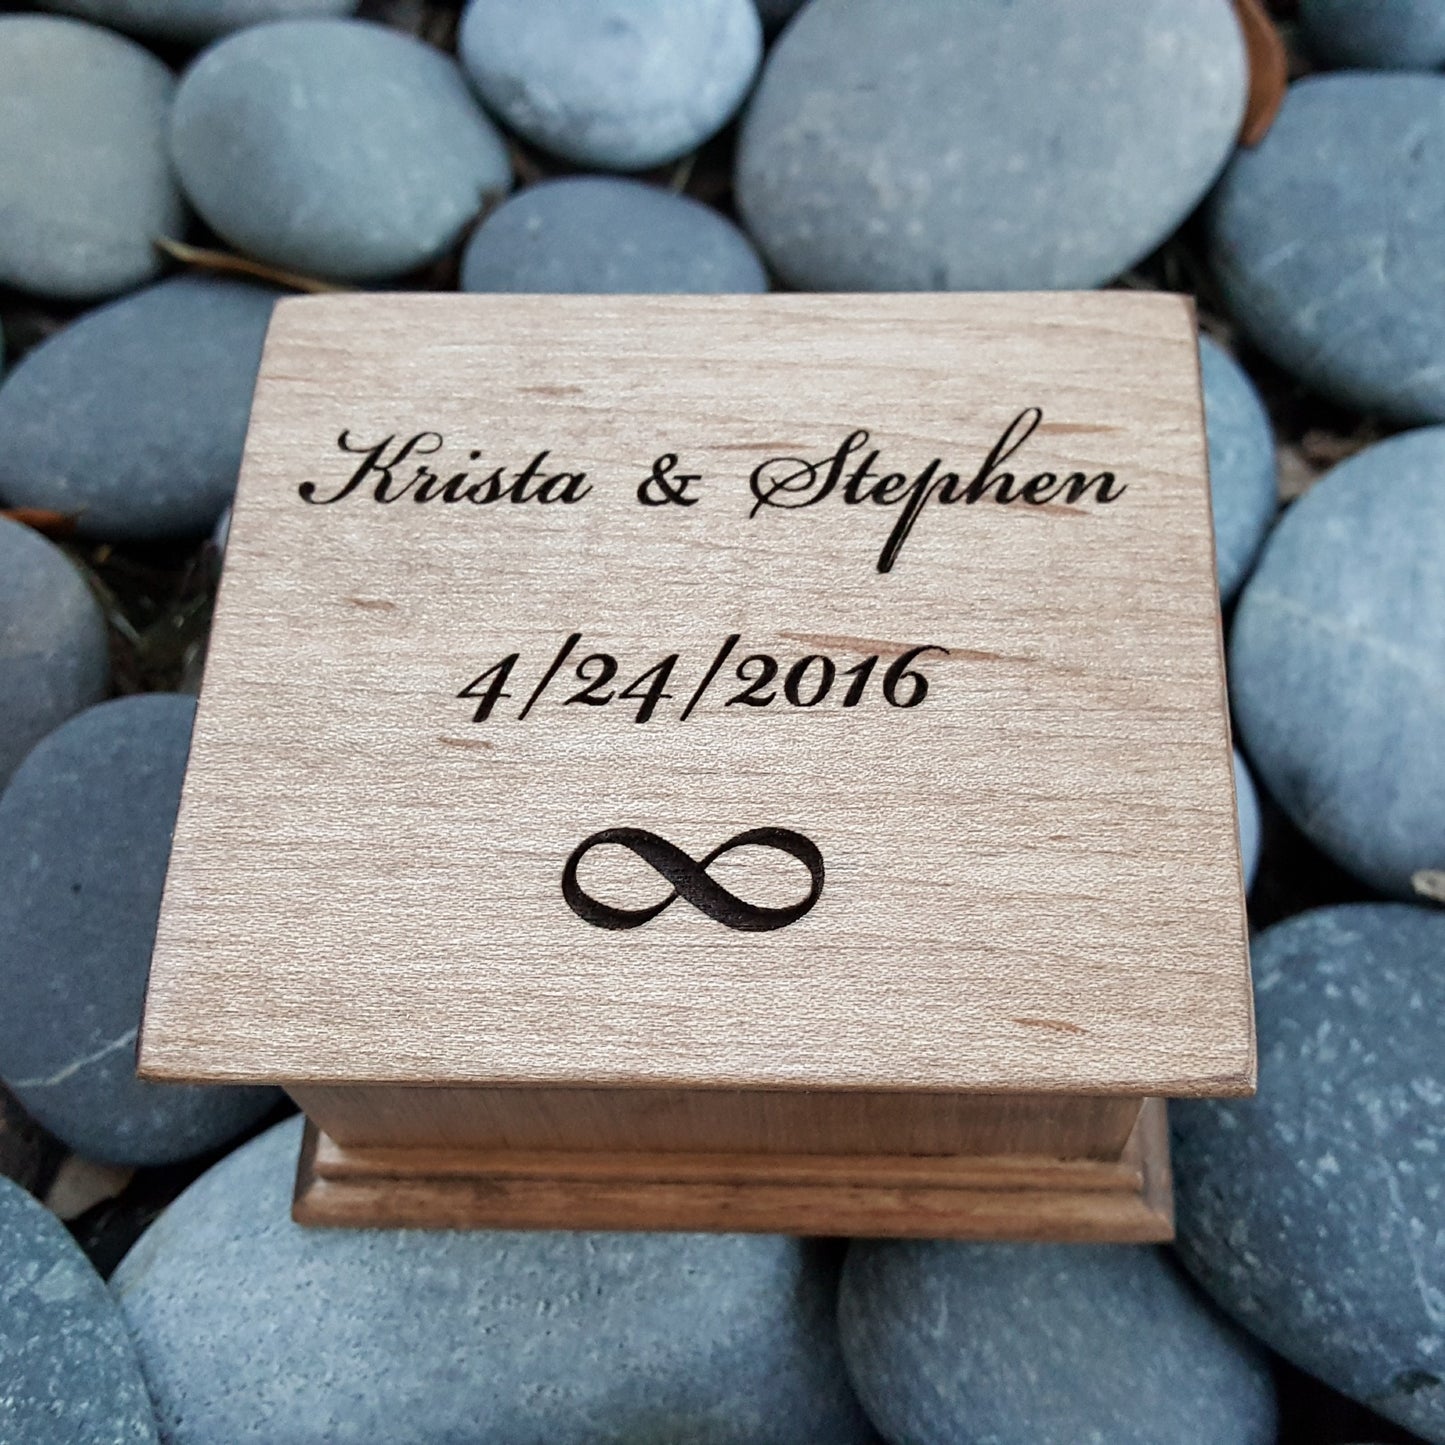 Anniversary gift box, music box with your names and date engraved on top, along with infinity symbol, choose song and color